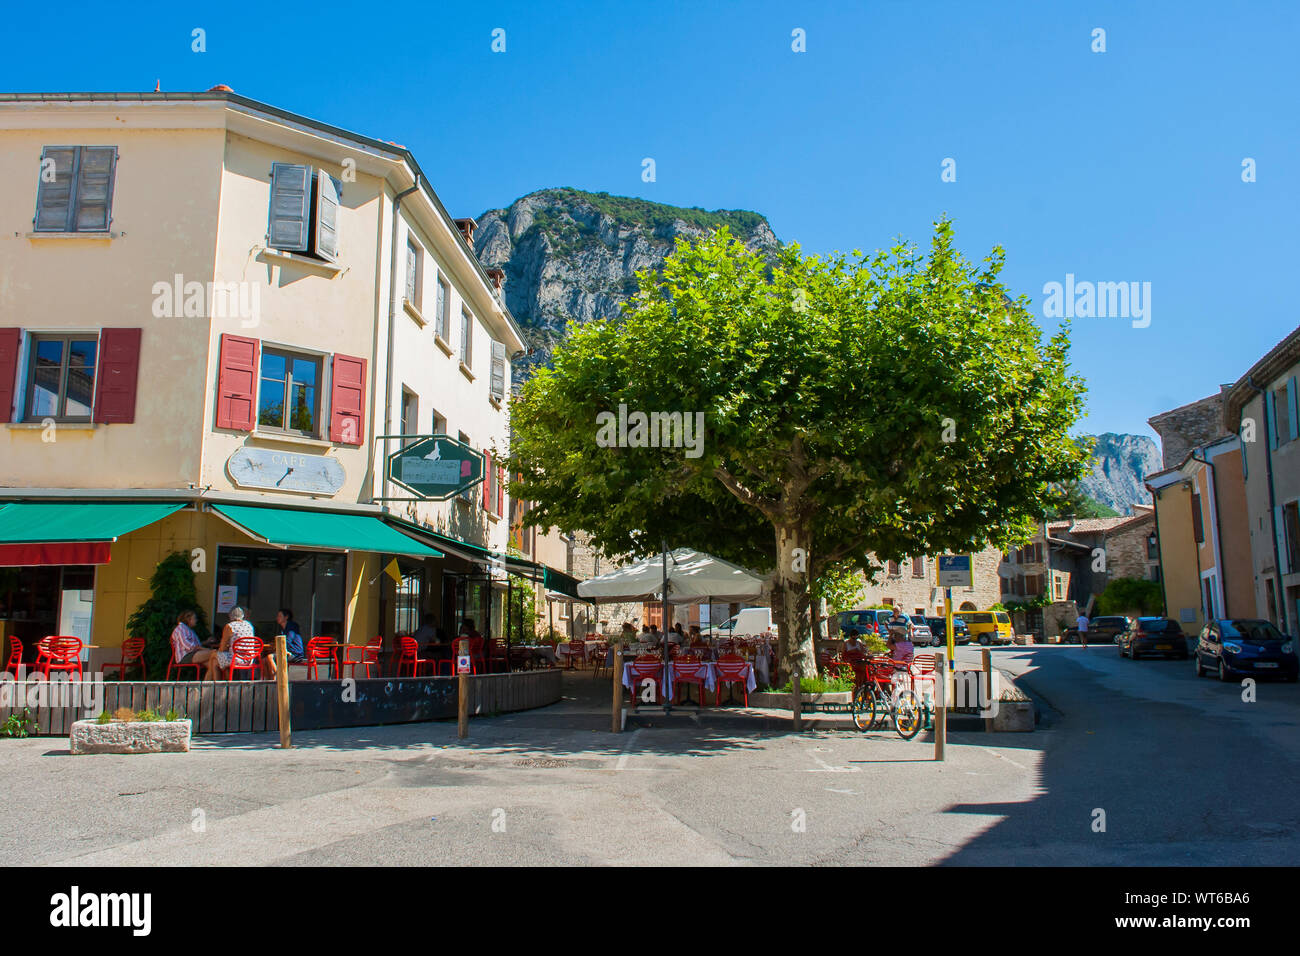 3 August 2015 A small cafe edging a typical French Village square in the Drome region of Provencal in the South East of France Stock Photo